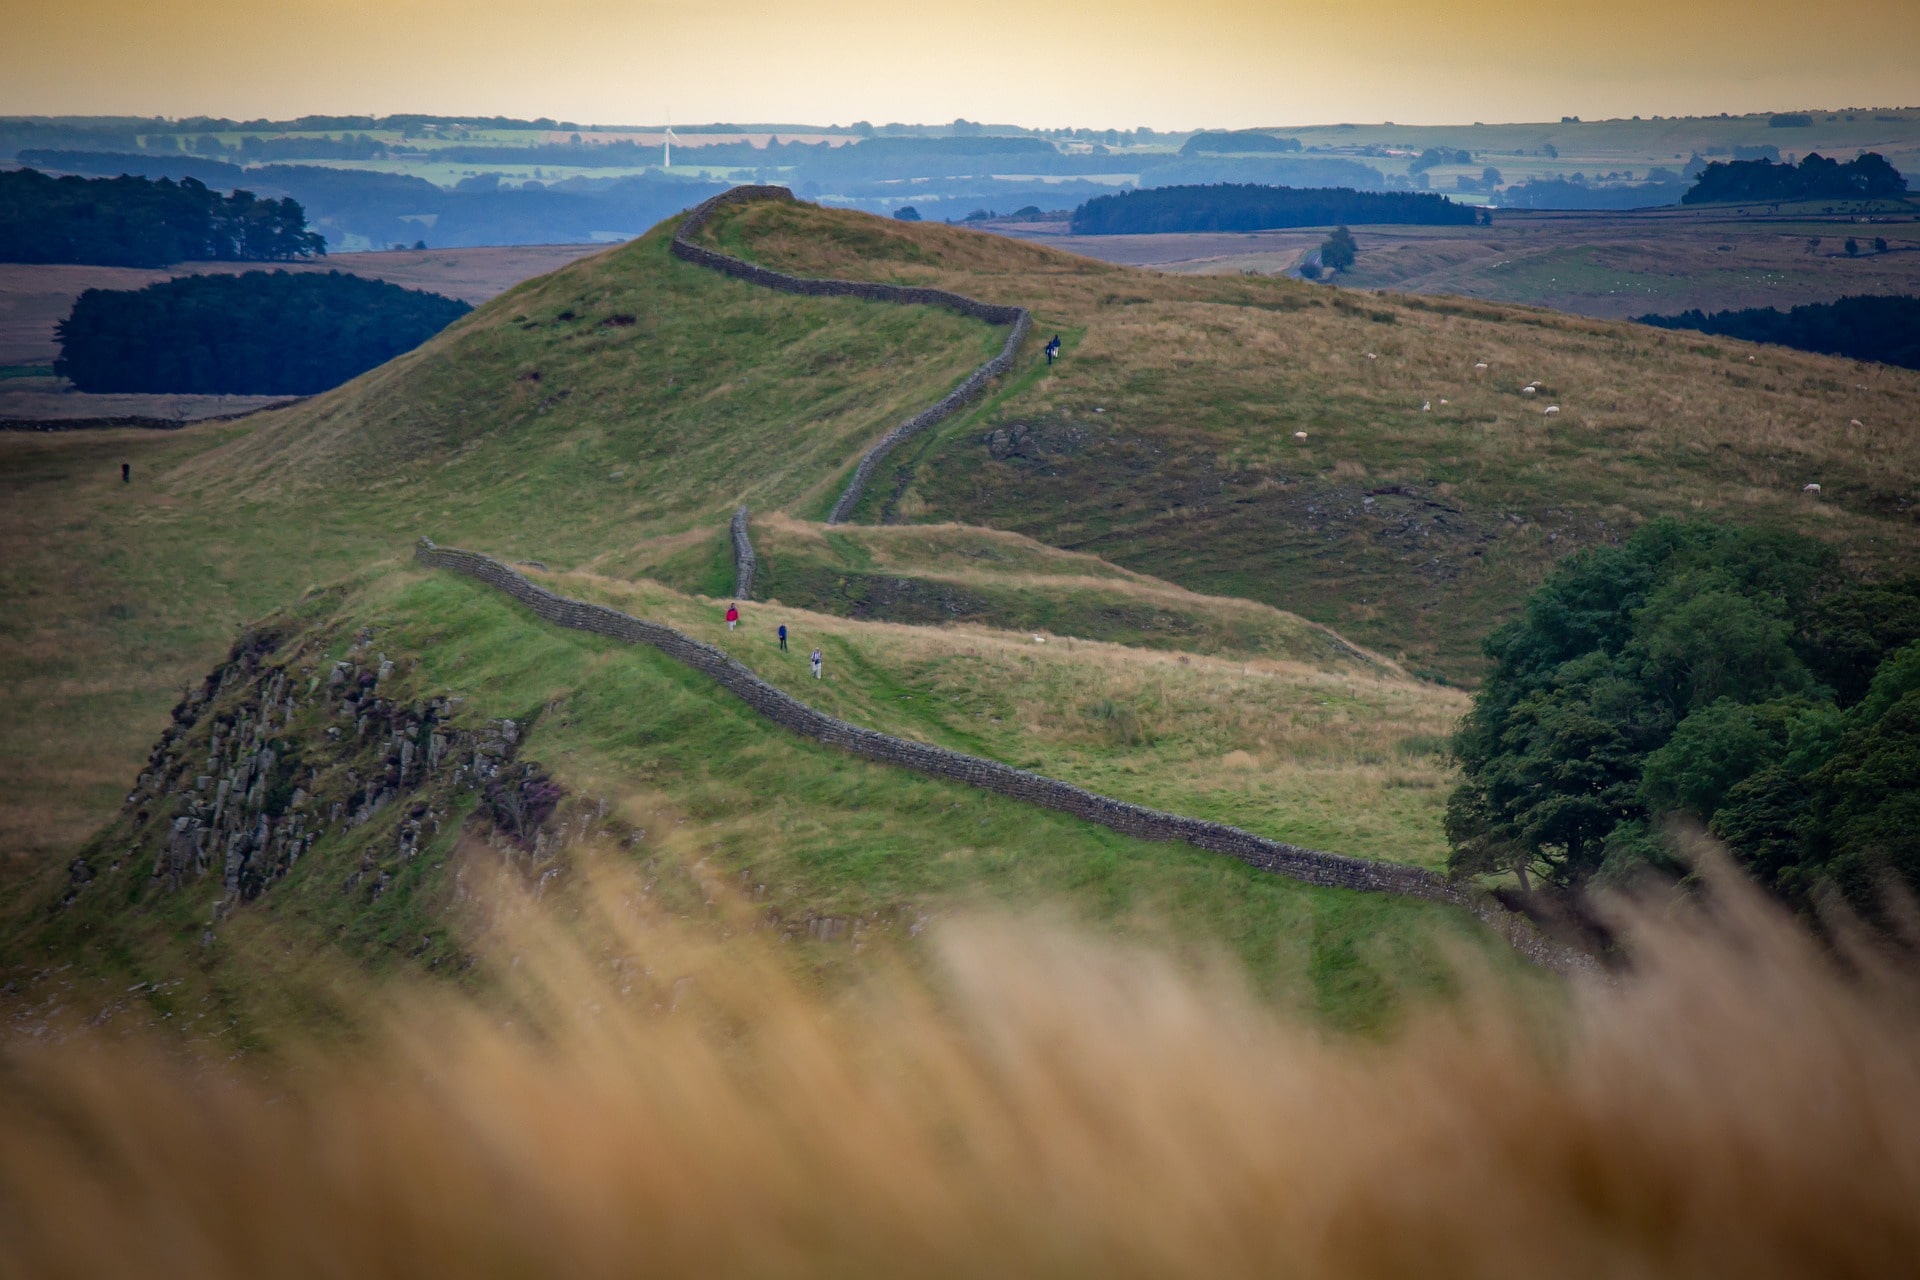 rubble-wall-hadrians-wall-winding-through-countryside-hills-at-sunset-best-places-to-visit-in-northumberland